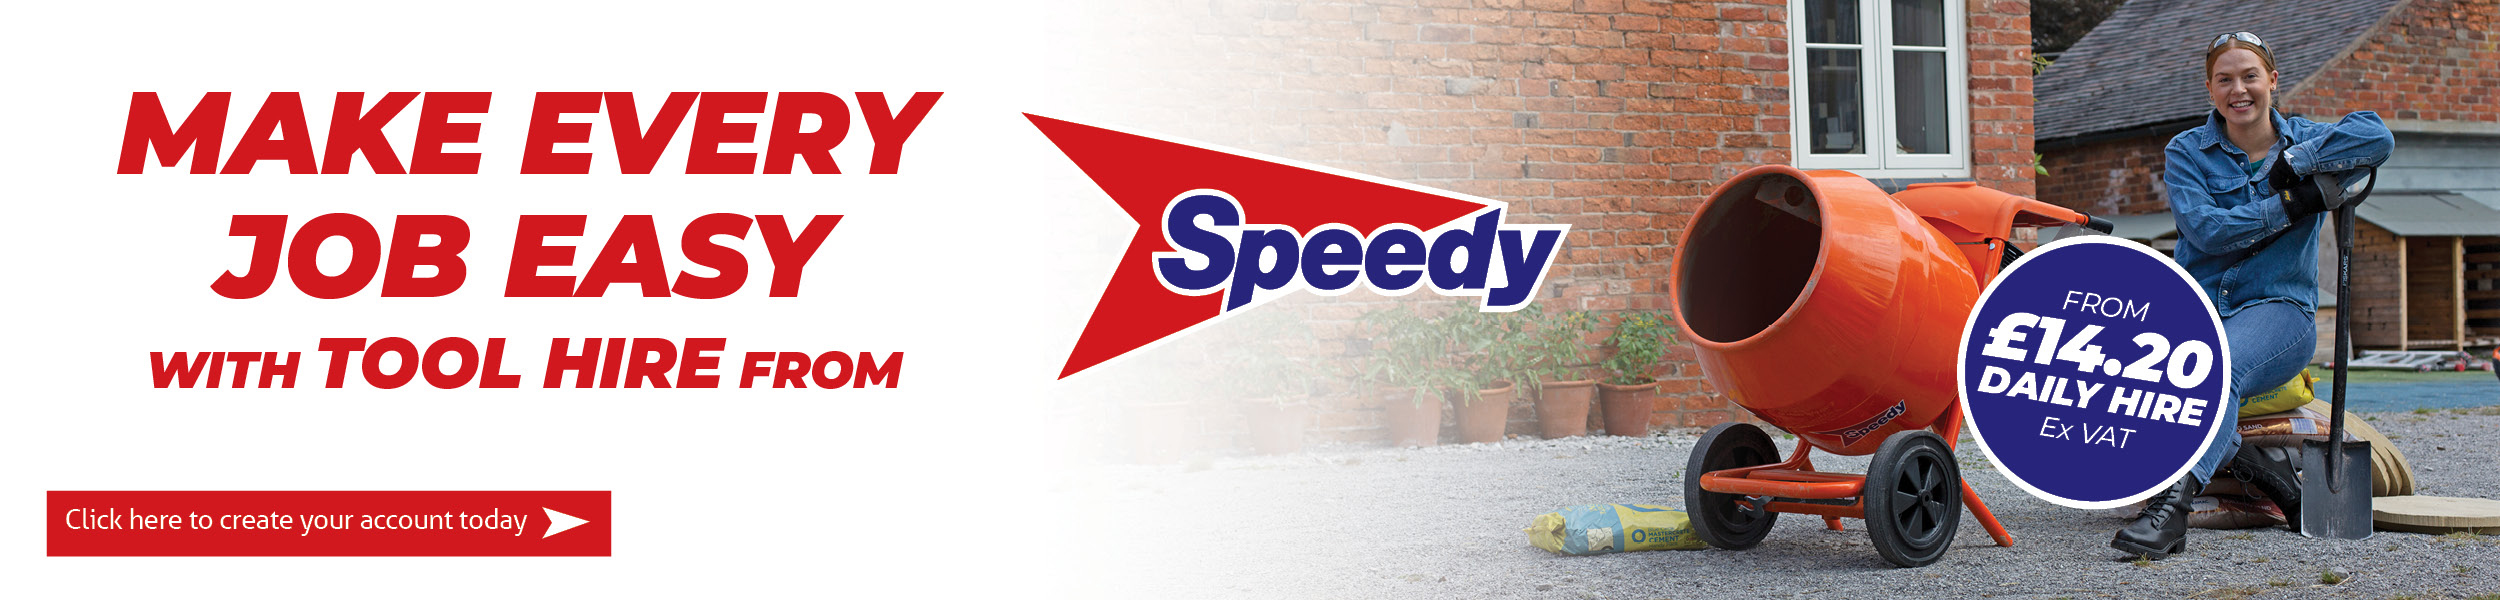 Make every job easy with tool hire from Speedy